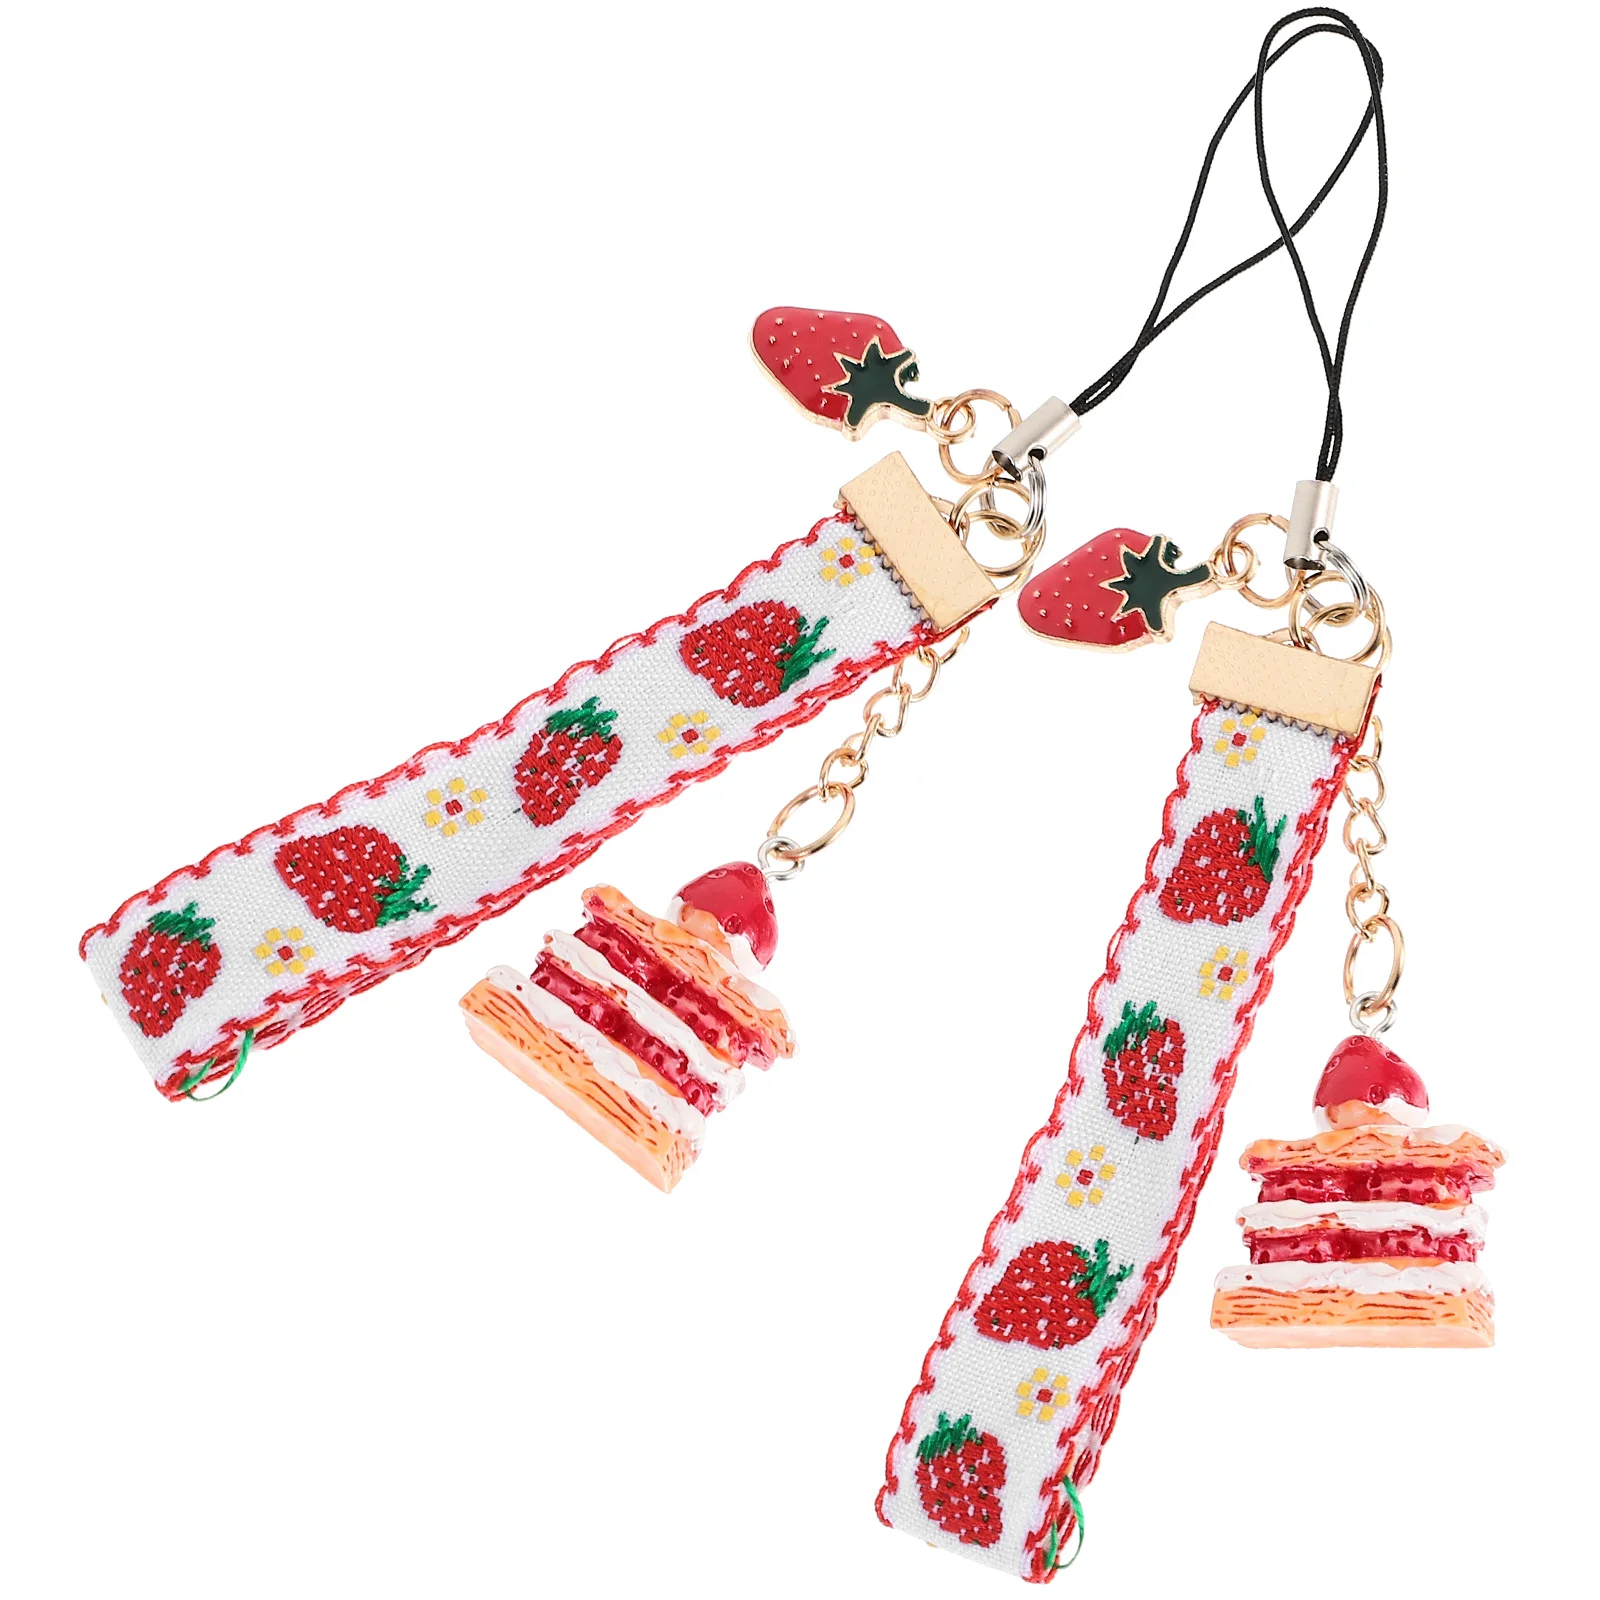 

2 Pcs Cake Strawberry Lanyard Unique Phone Hanging Chain Mobile DIY Decorating Props Accessory Alloy Girl Accessories